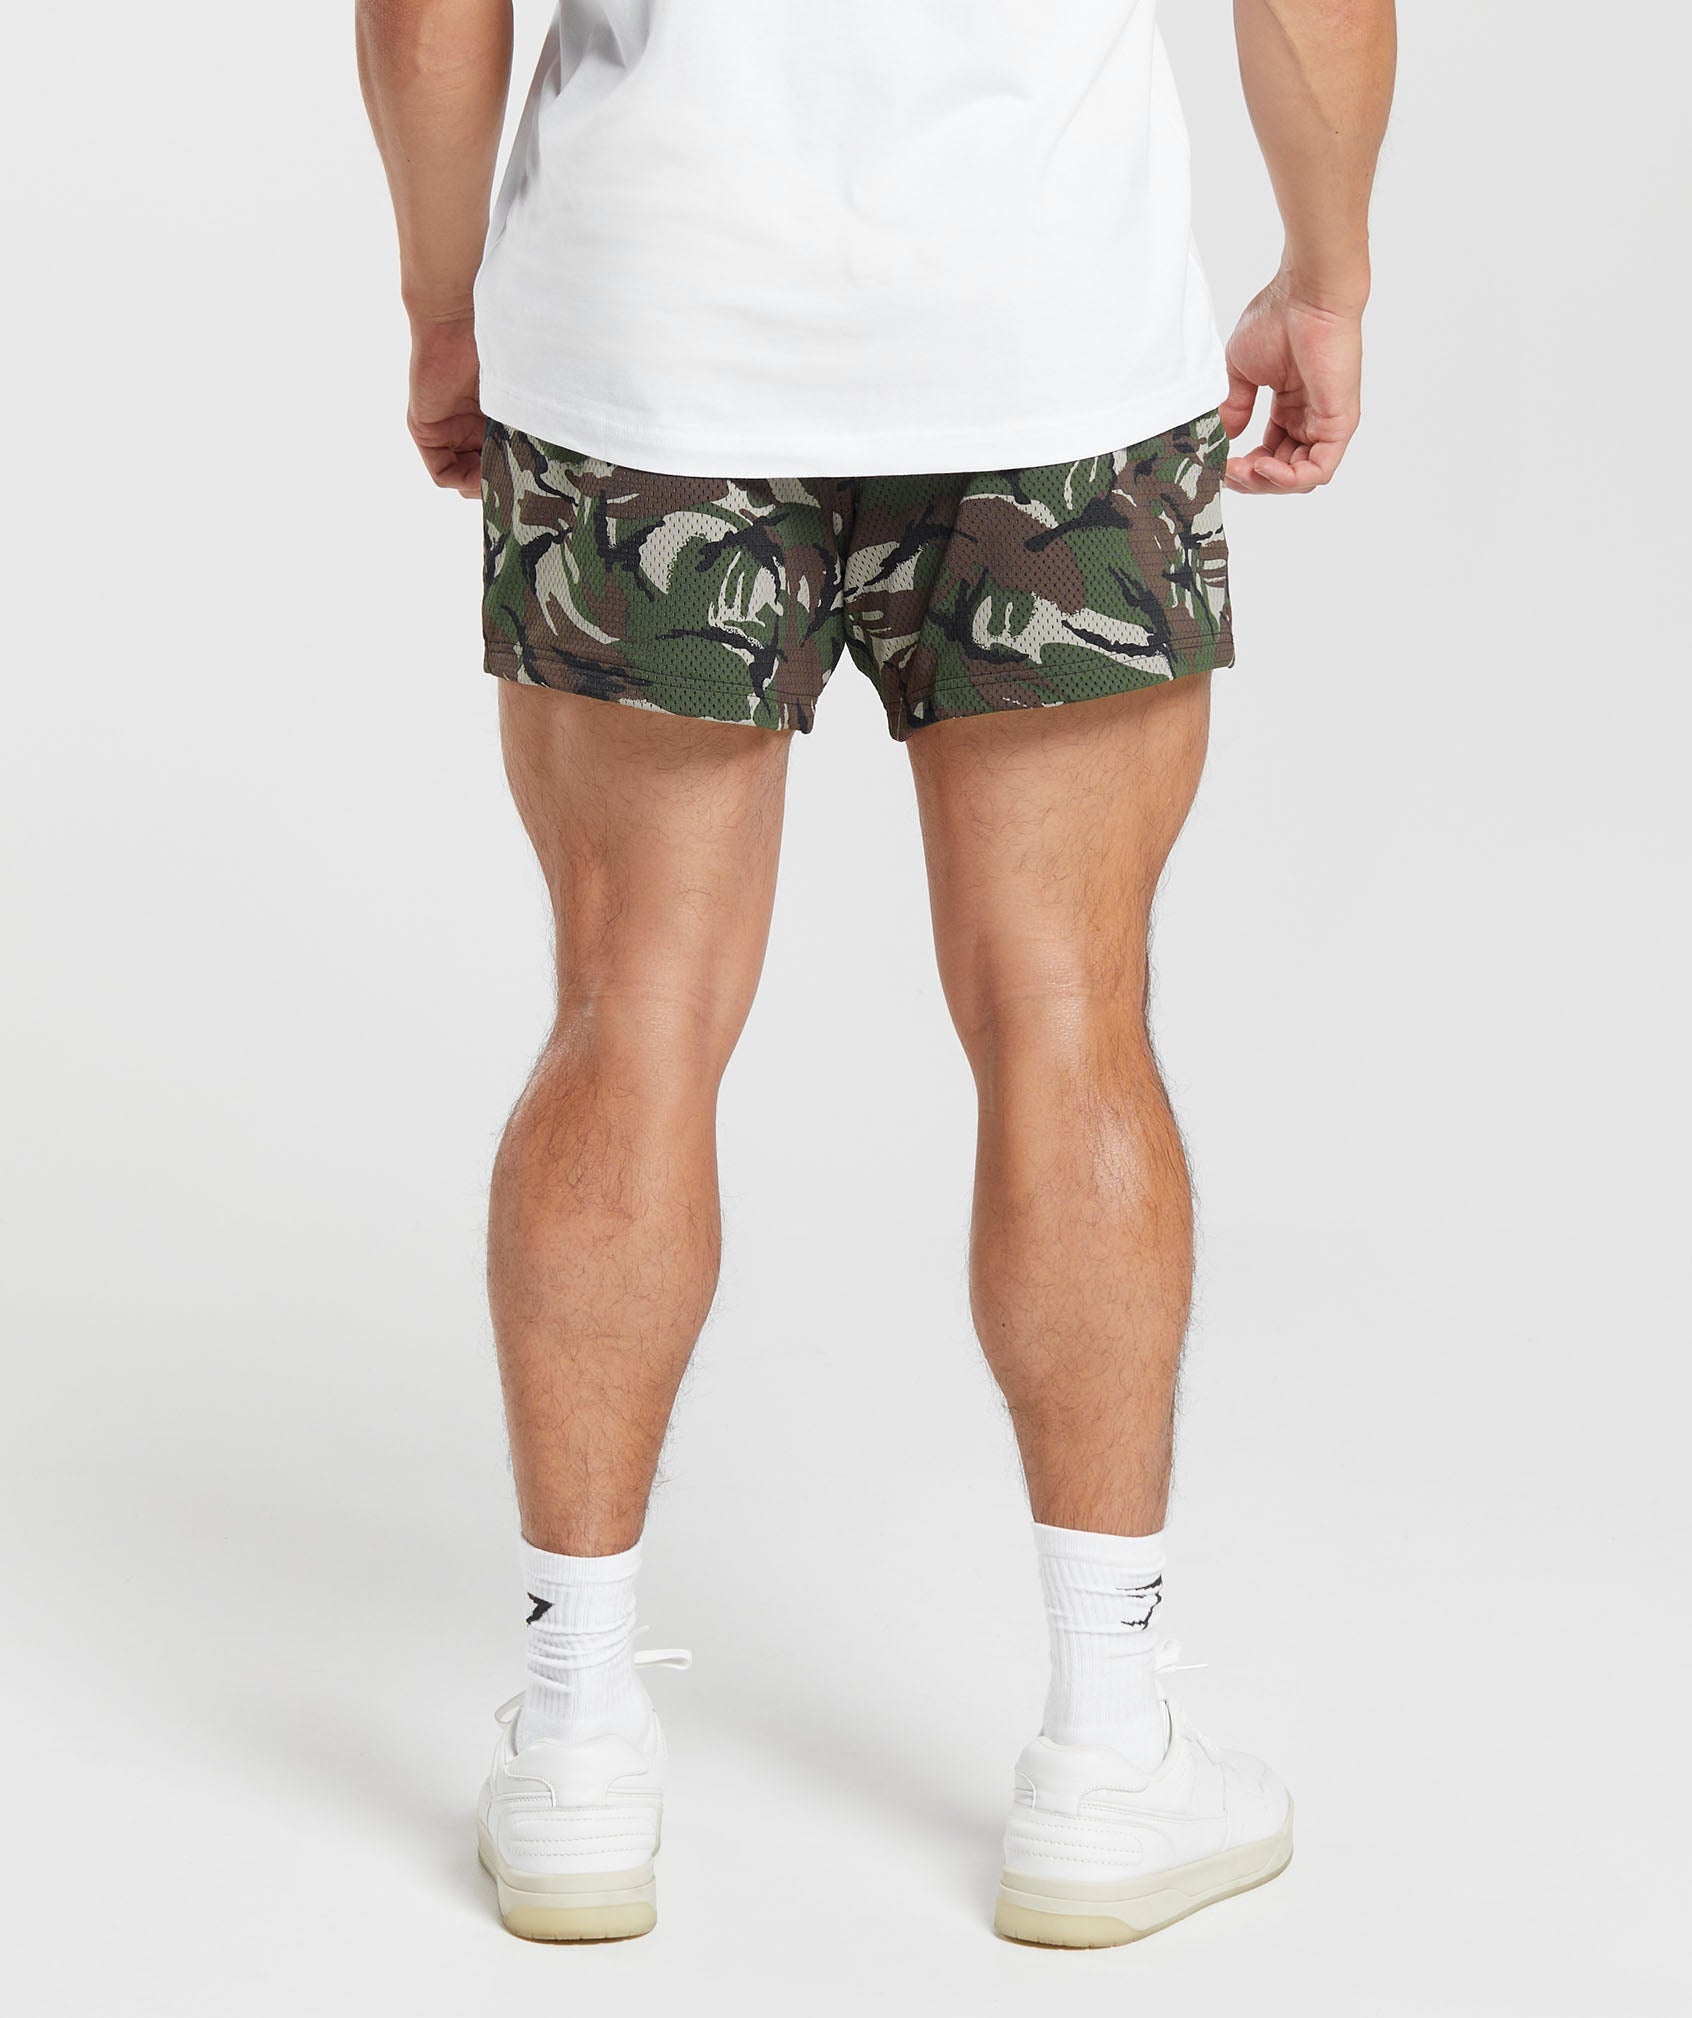 Lifting Club Printed Mesh 5" Shorts in Winter Olive - view 2